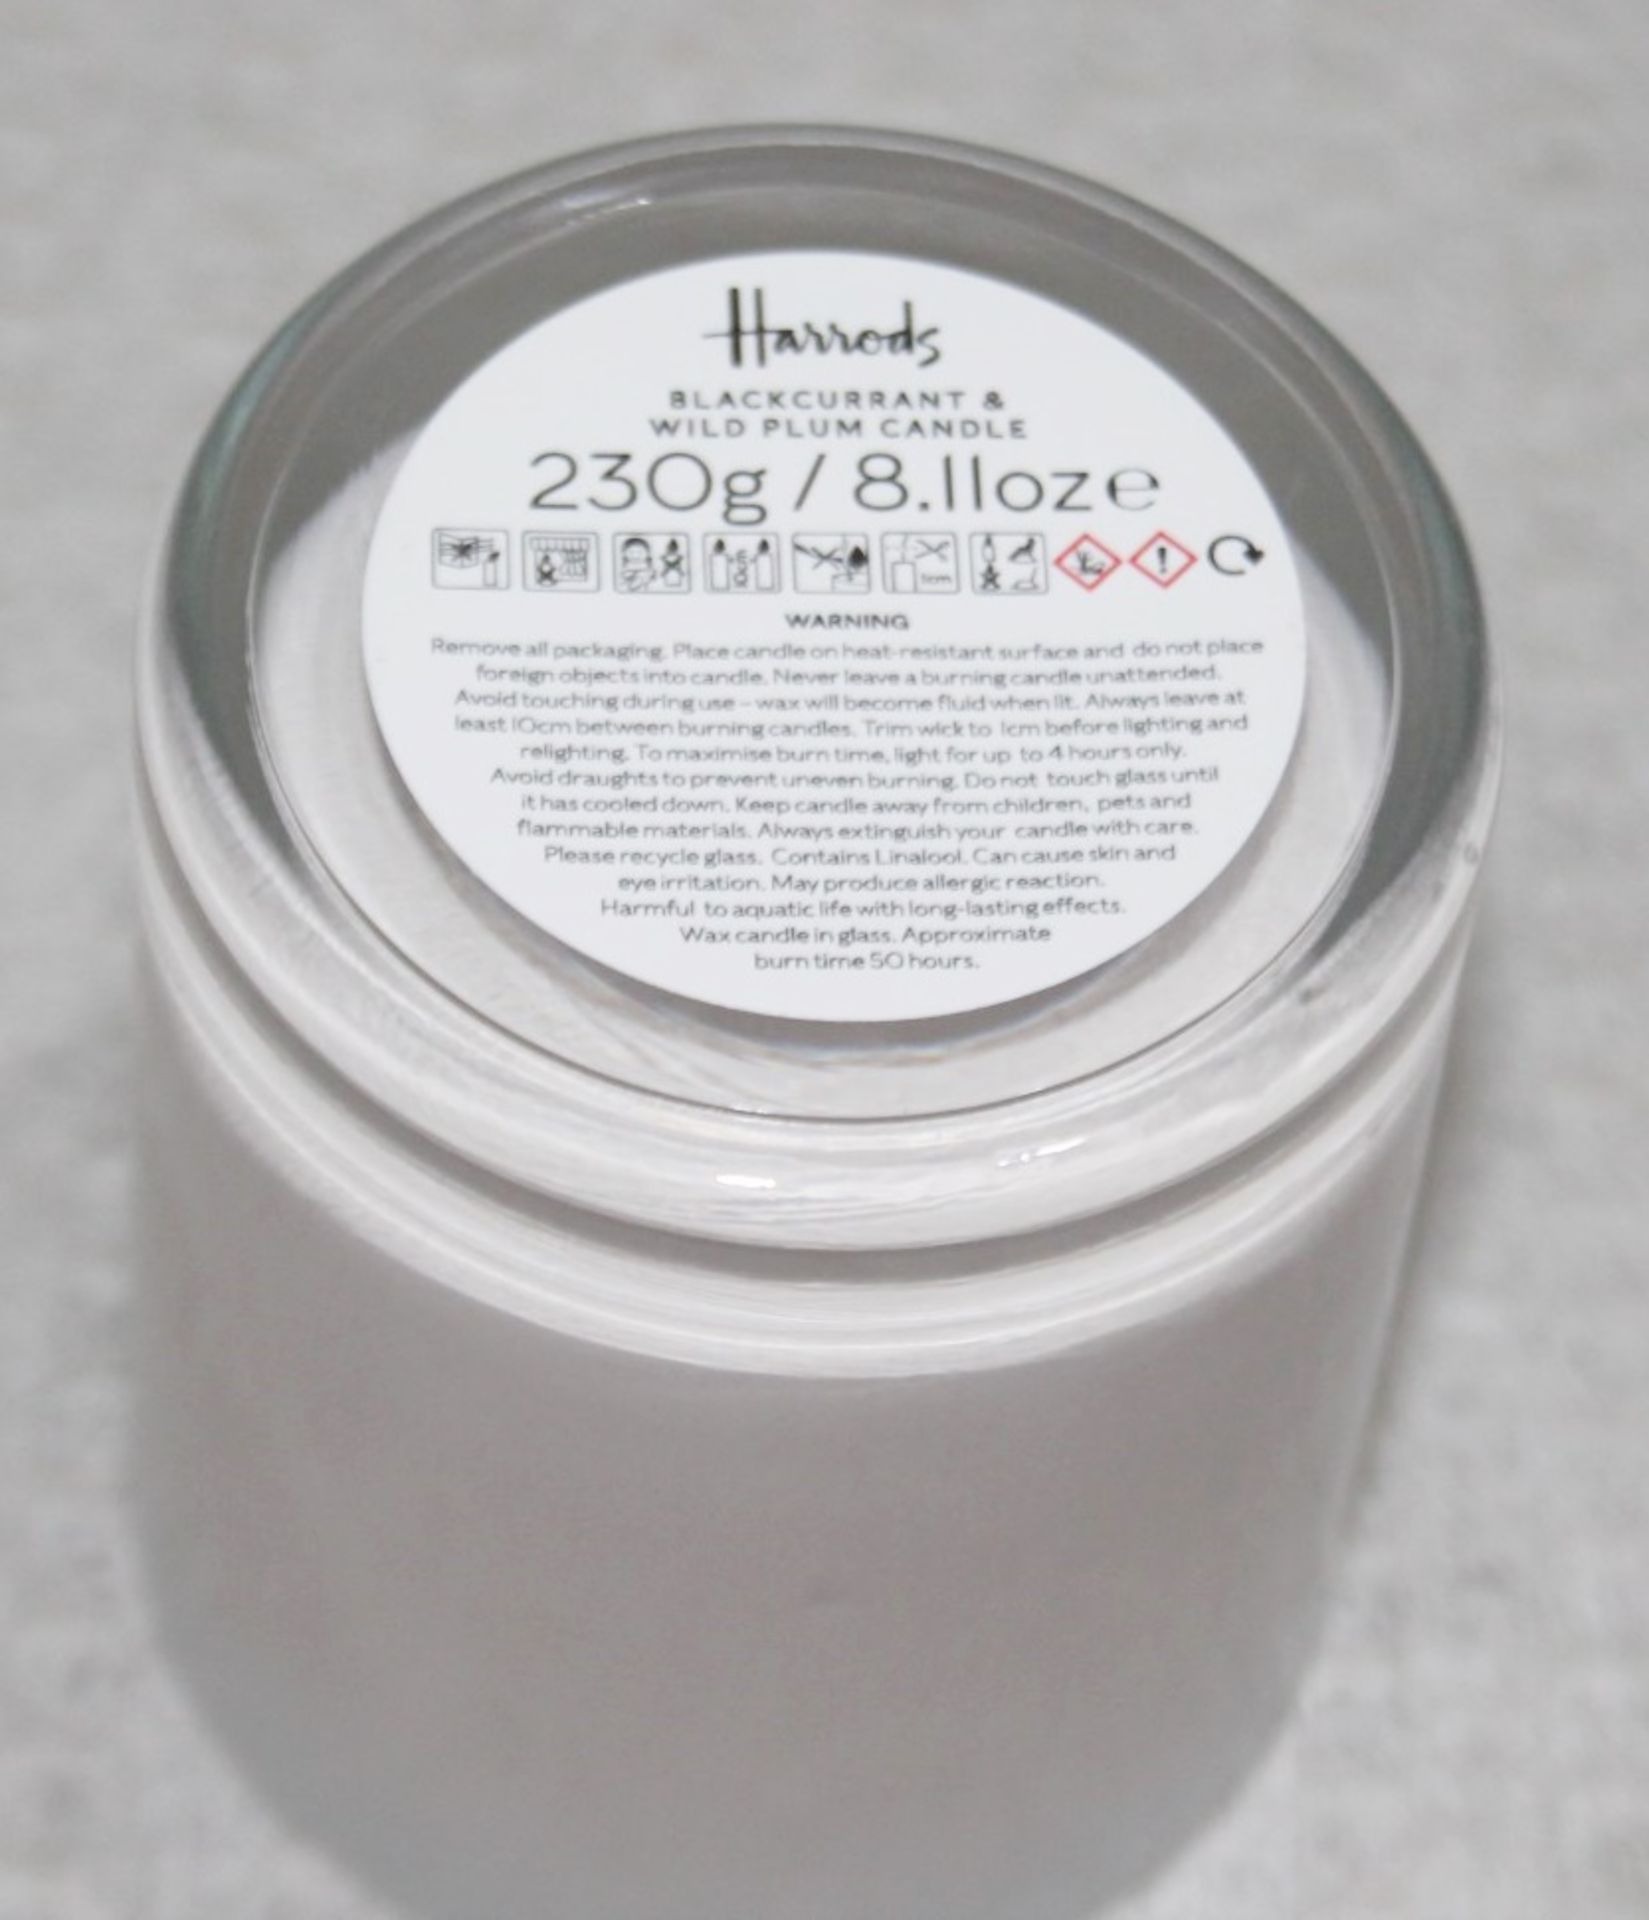 1 x HARRODS Branded Blackcurrant And Wild Plum Candle (230g) - Unused Boxed Stock - Ref: HHW369/ - Image 3 of 5